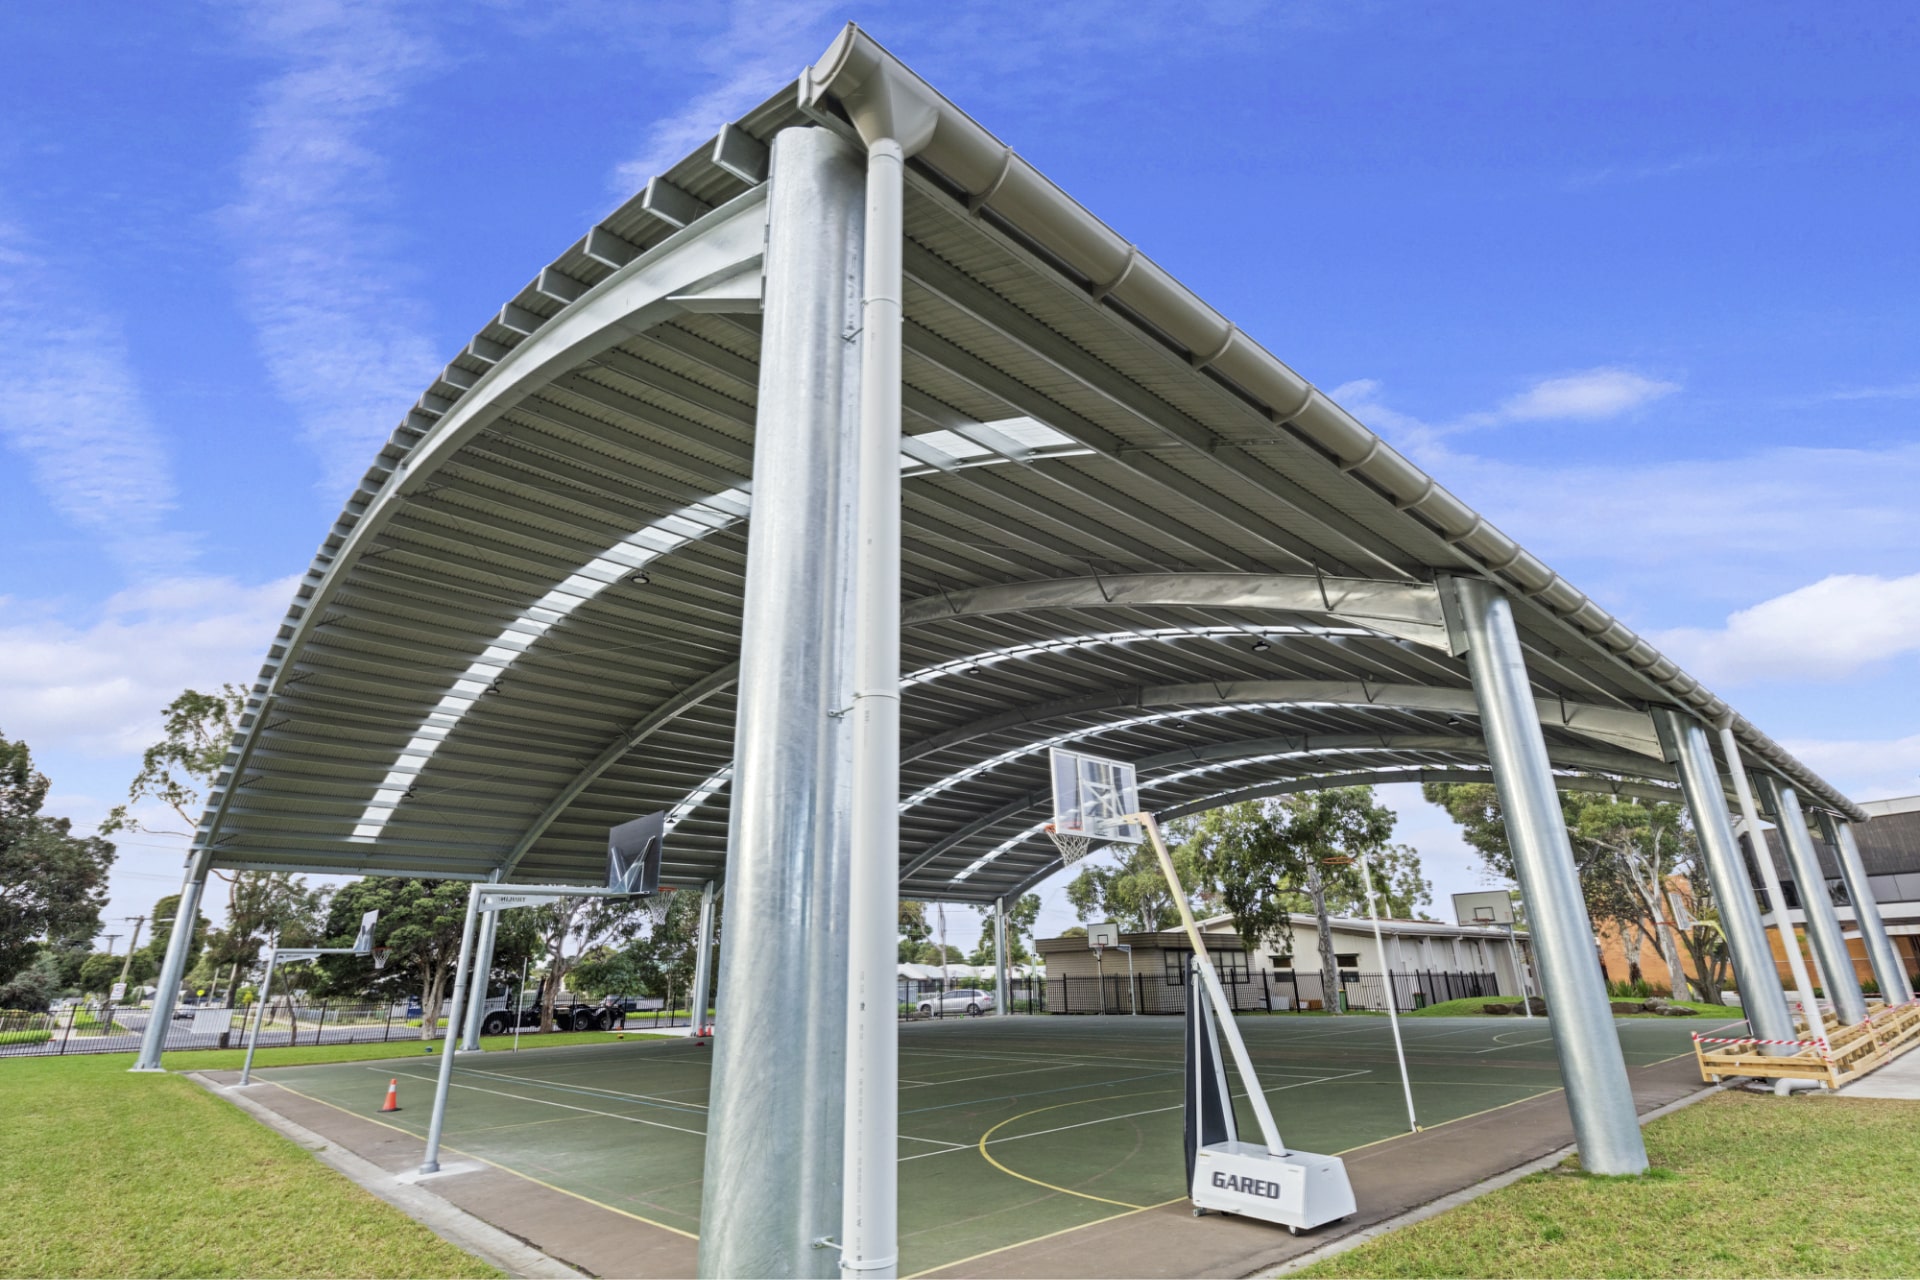 Curved steel school shade cover structure